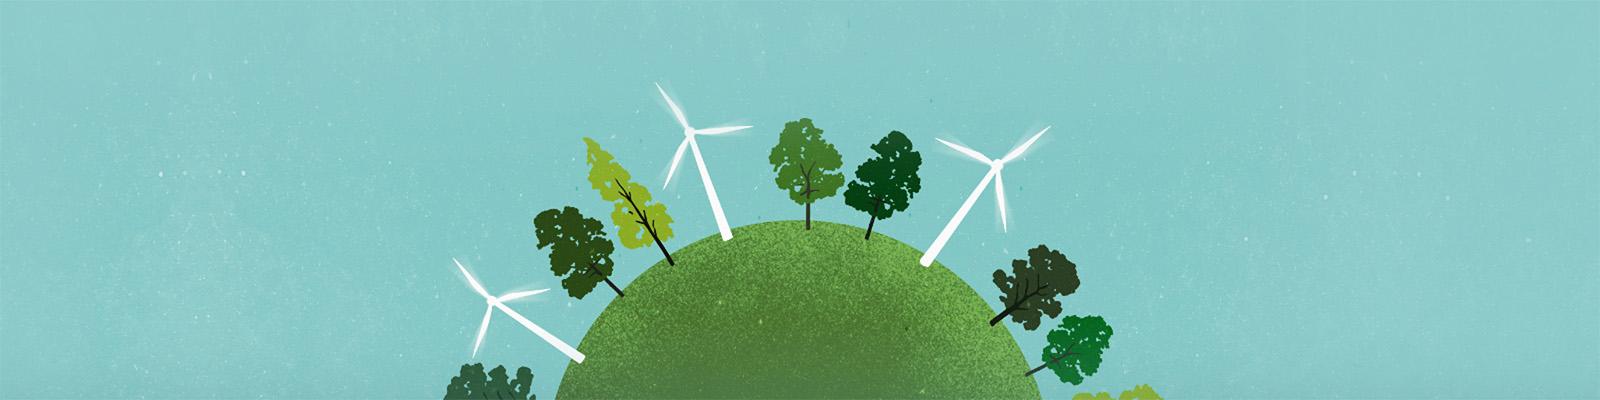 A vector drawing image of a blue sky and green grass globe with trees and wind turbines.